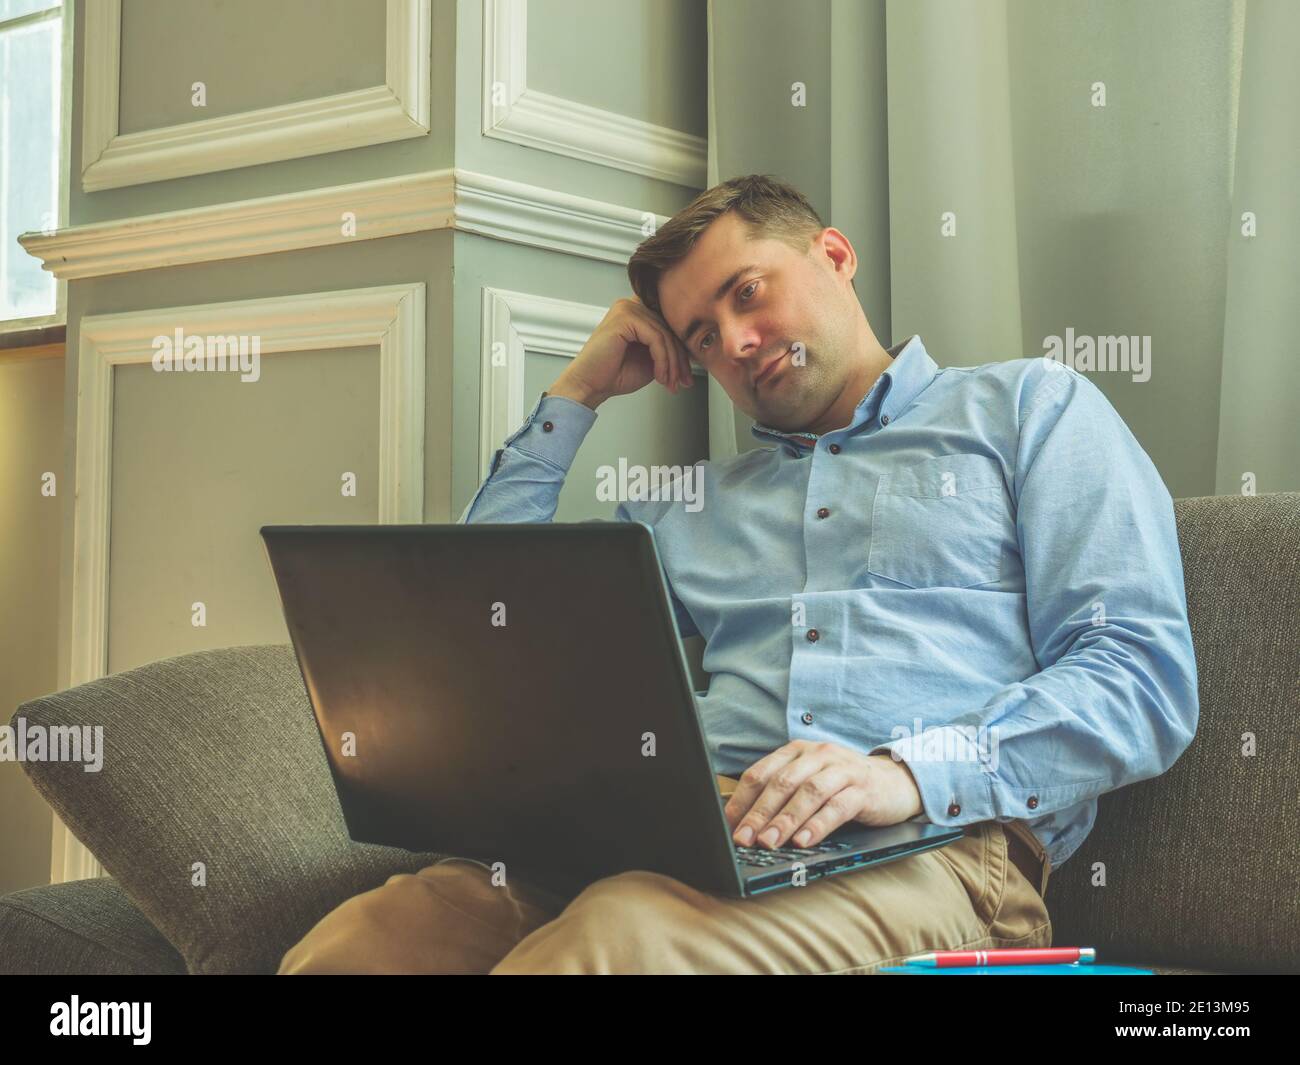 Tired sad man sitting at home on the couch with a laptop. Stock Photo